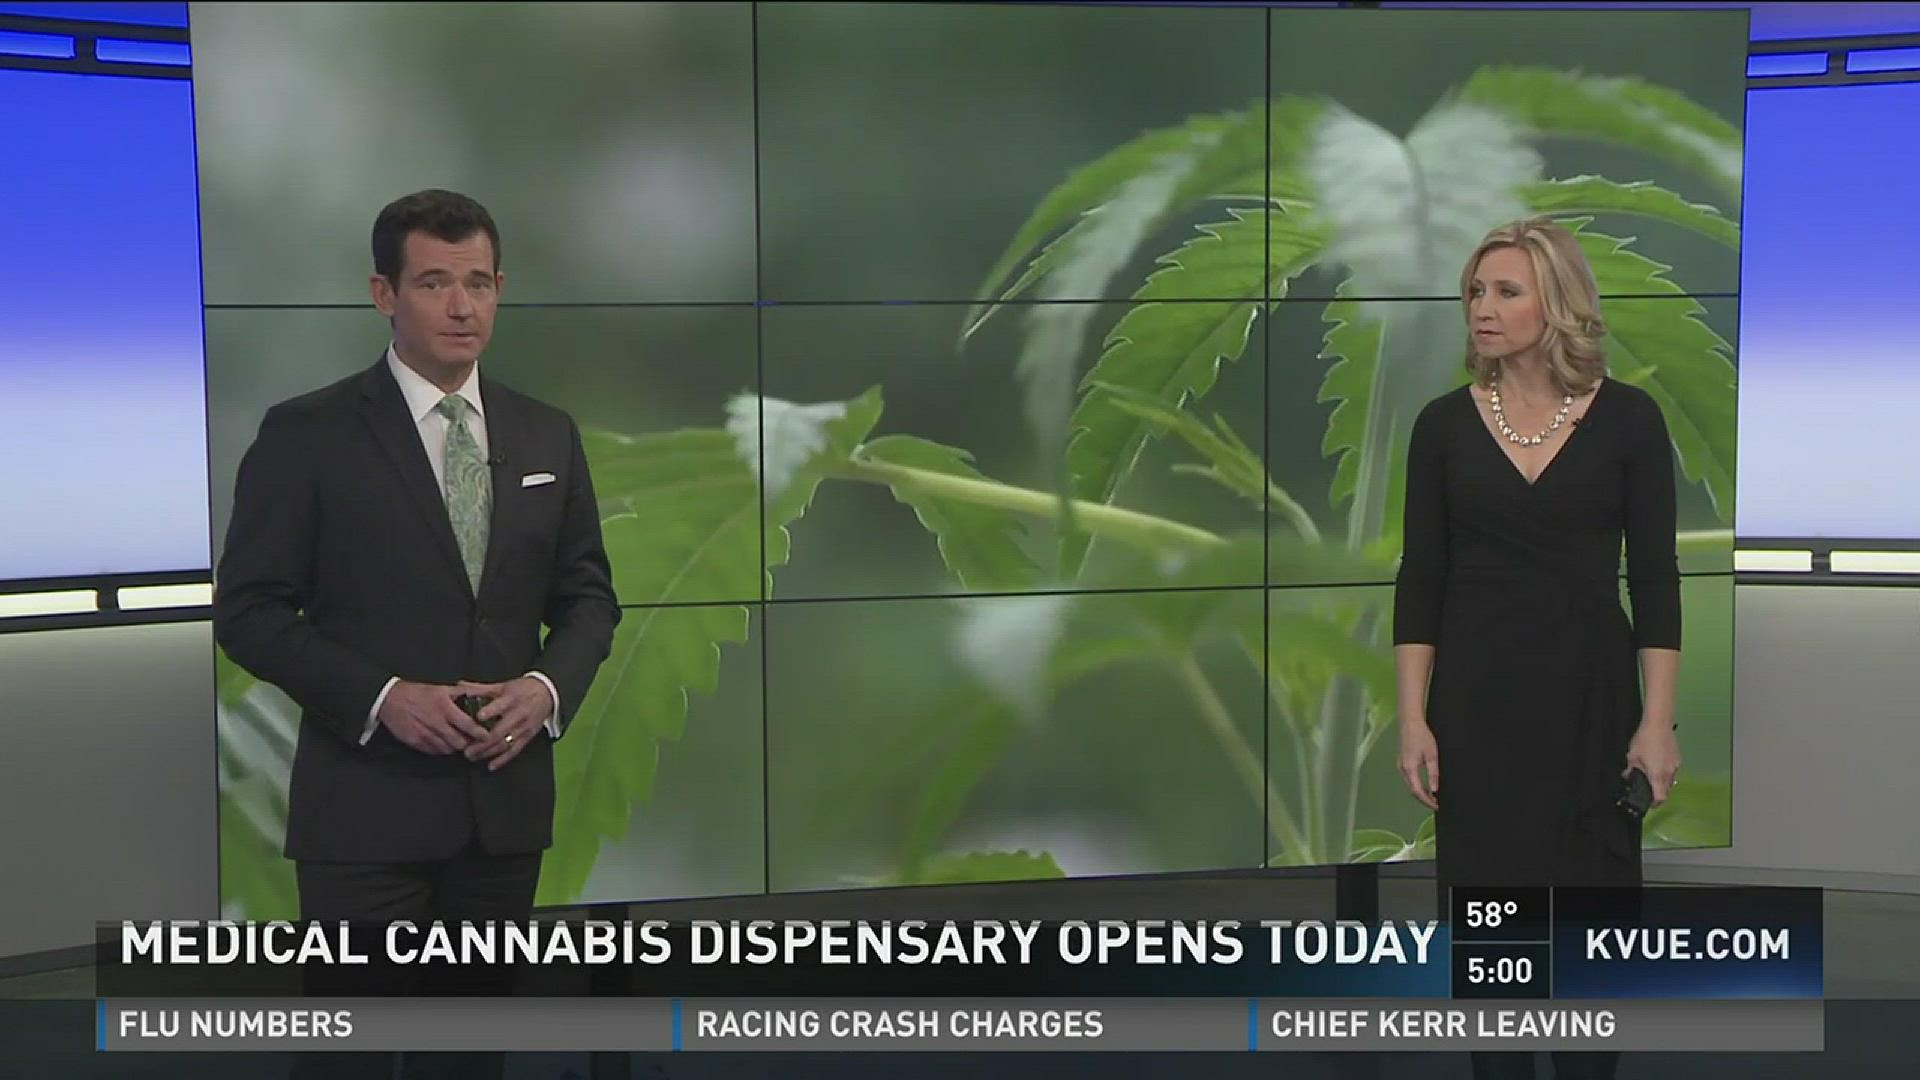 Medical cannabis is now available in Texas. A dispensary in South Austin opened its doors today, now selling CBD oil to patients with epilepsy.